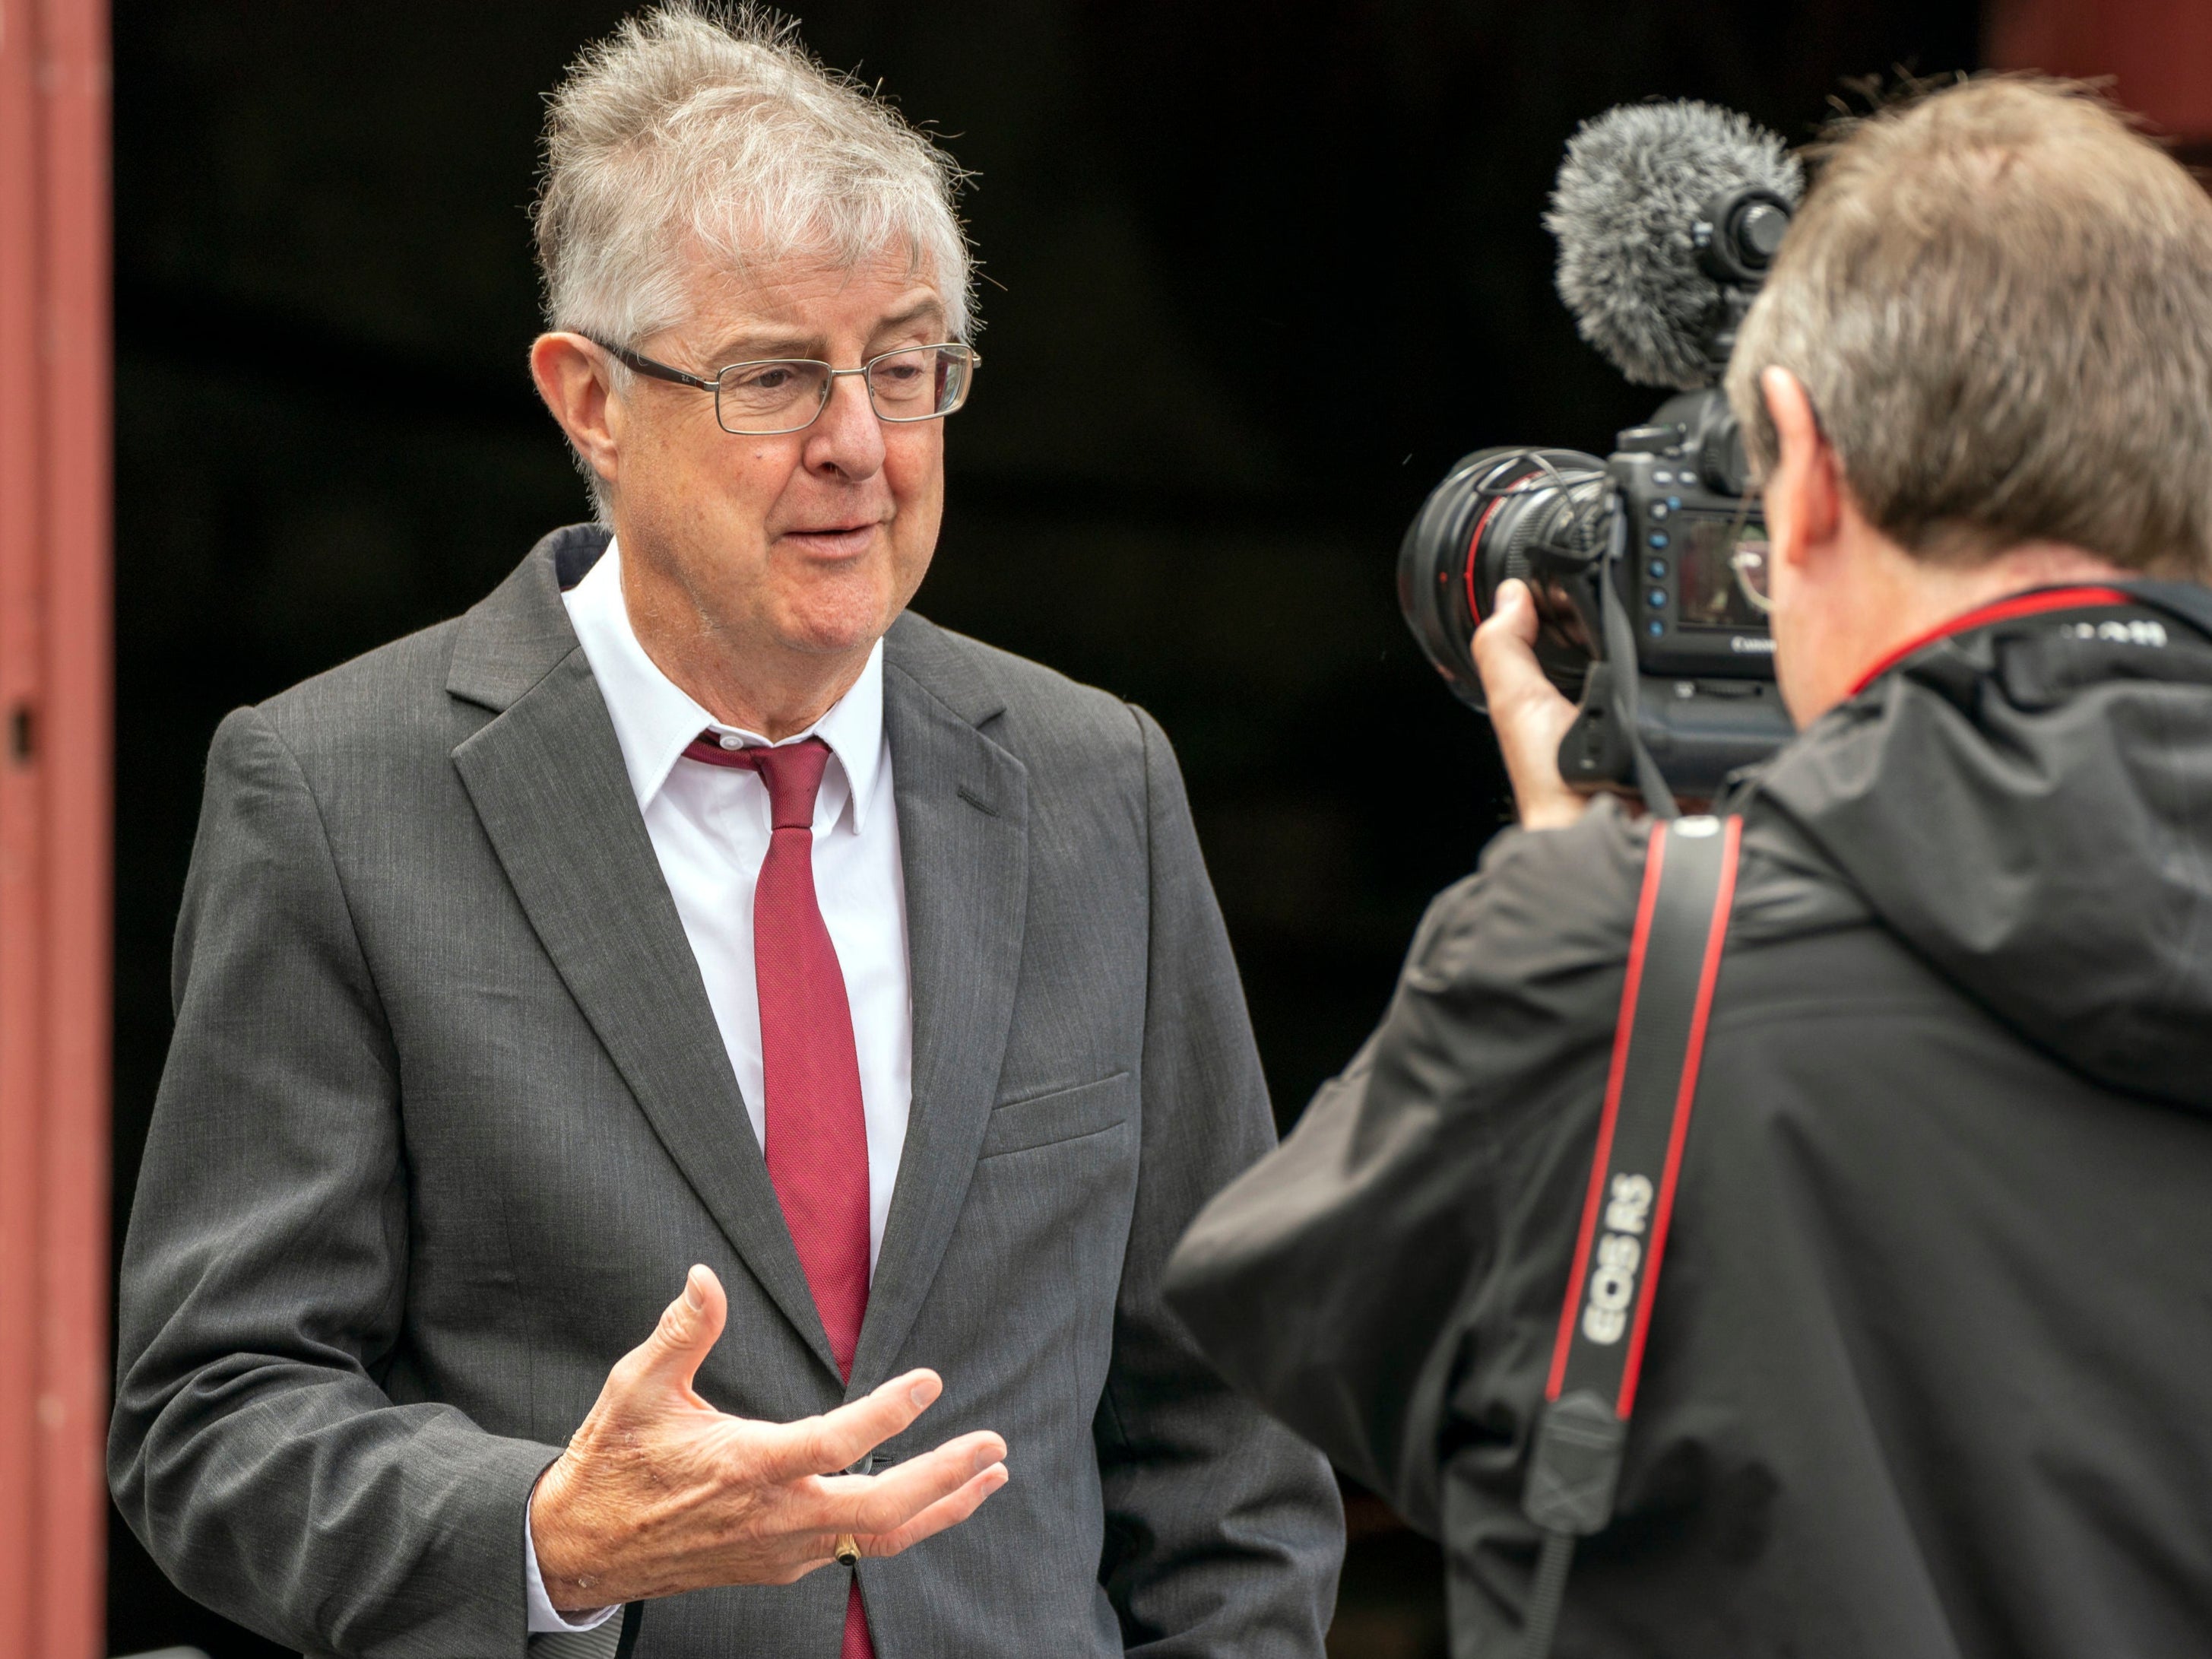 Mark Drakeford has confirmed that all businesses in Wales will be allowed to reopen this weekend as legal restrictions are lifted